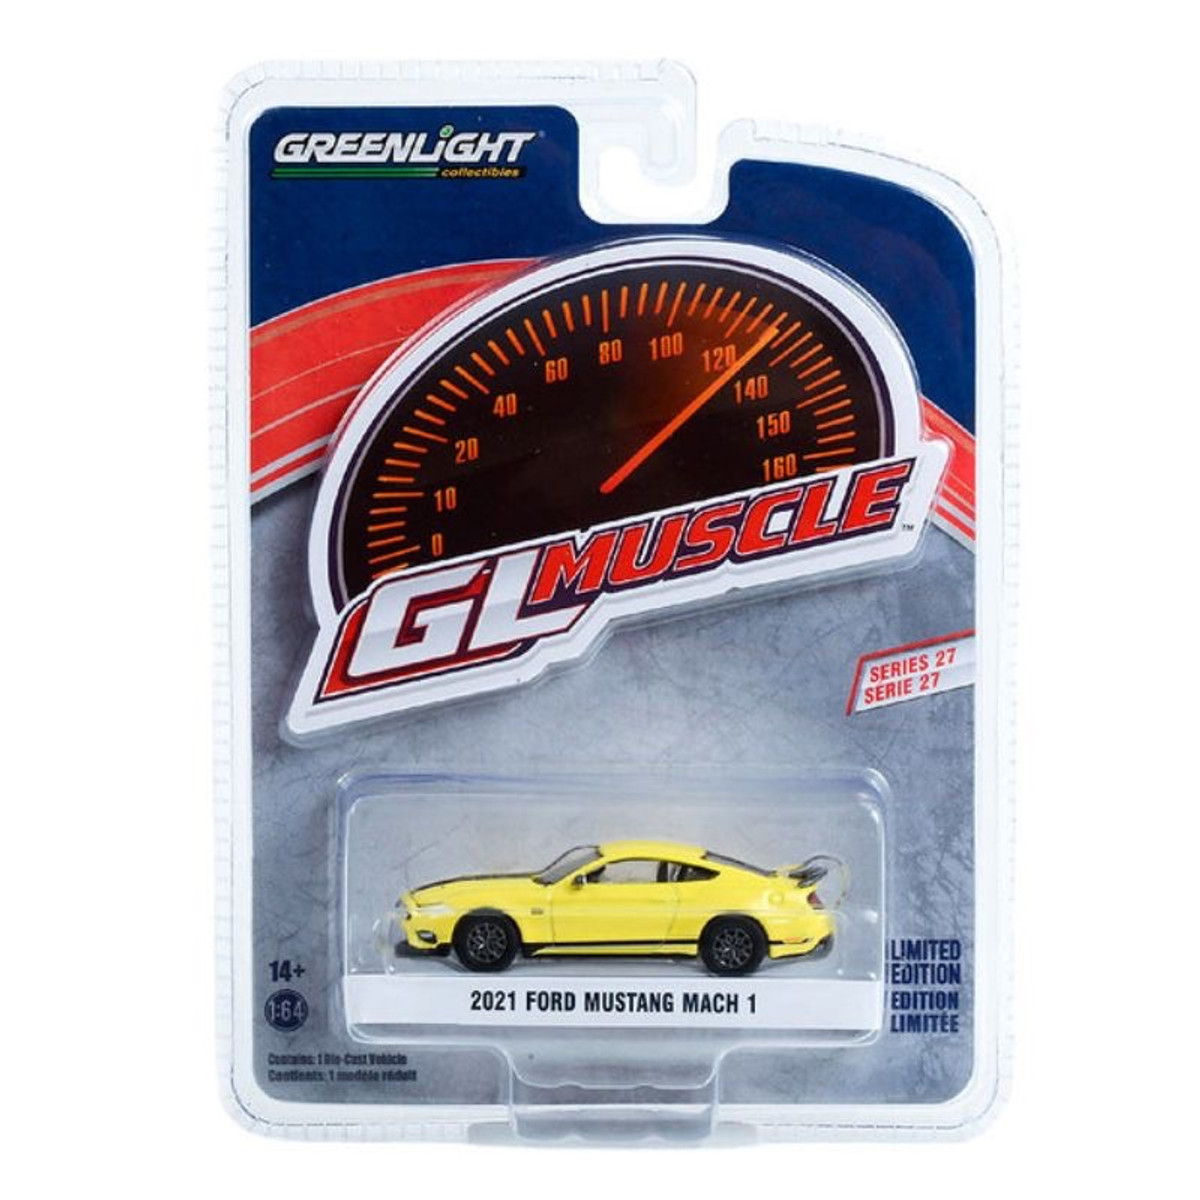 Greenlight GL Muscle 2021 Ford Mustang Mach 1 Series 27 